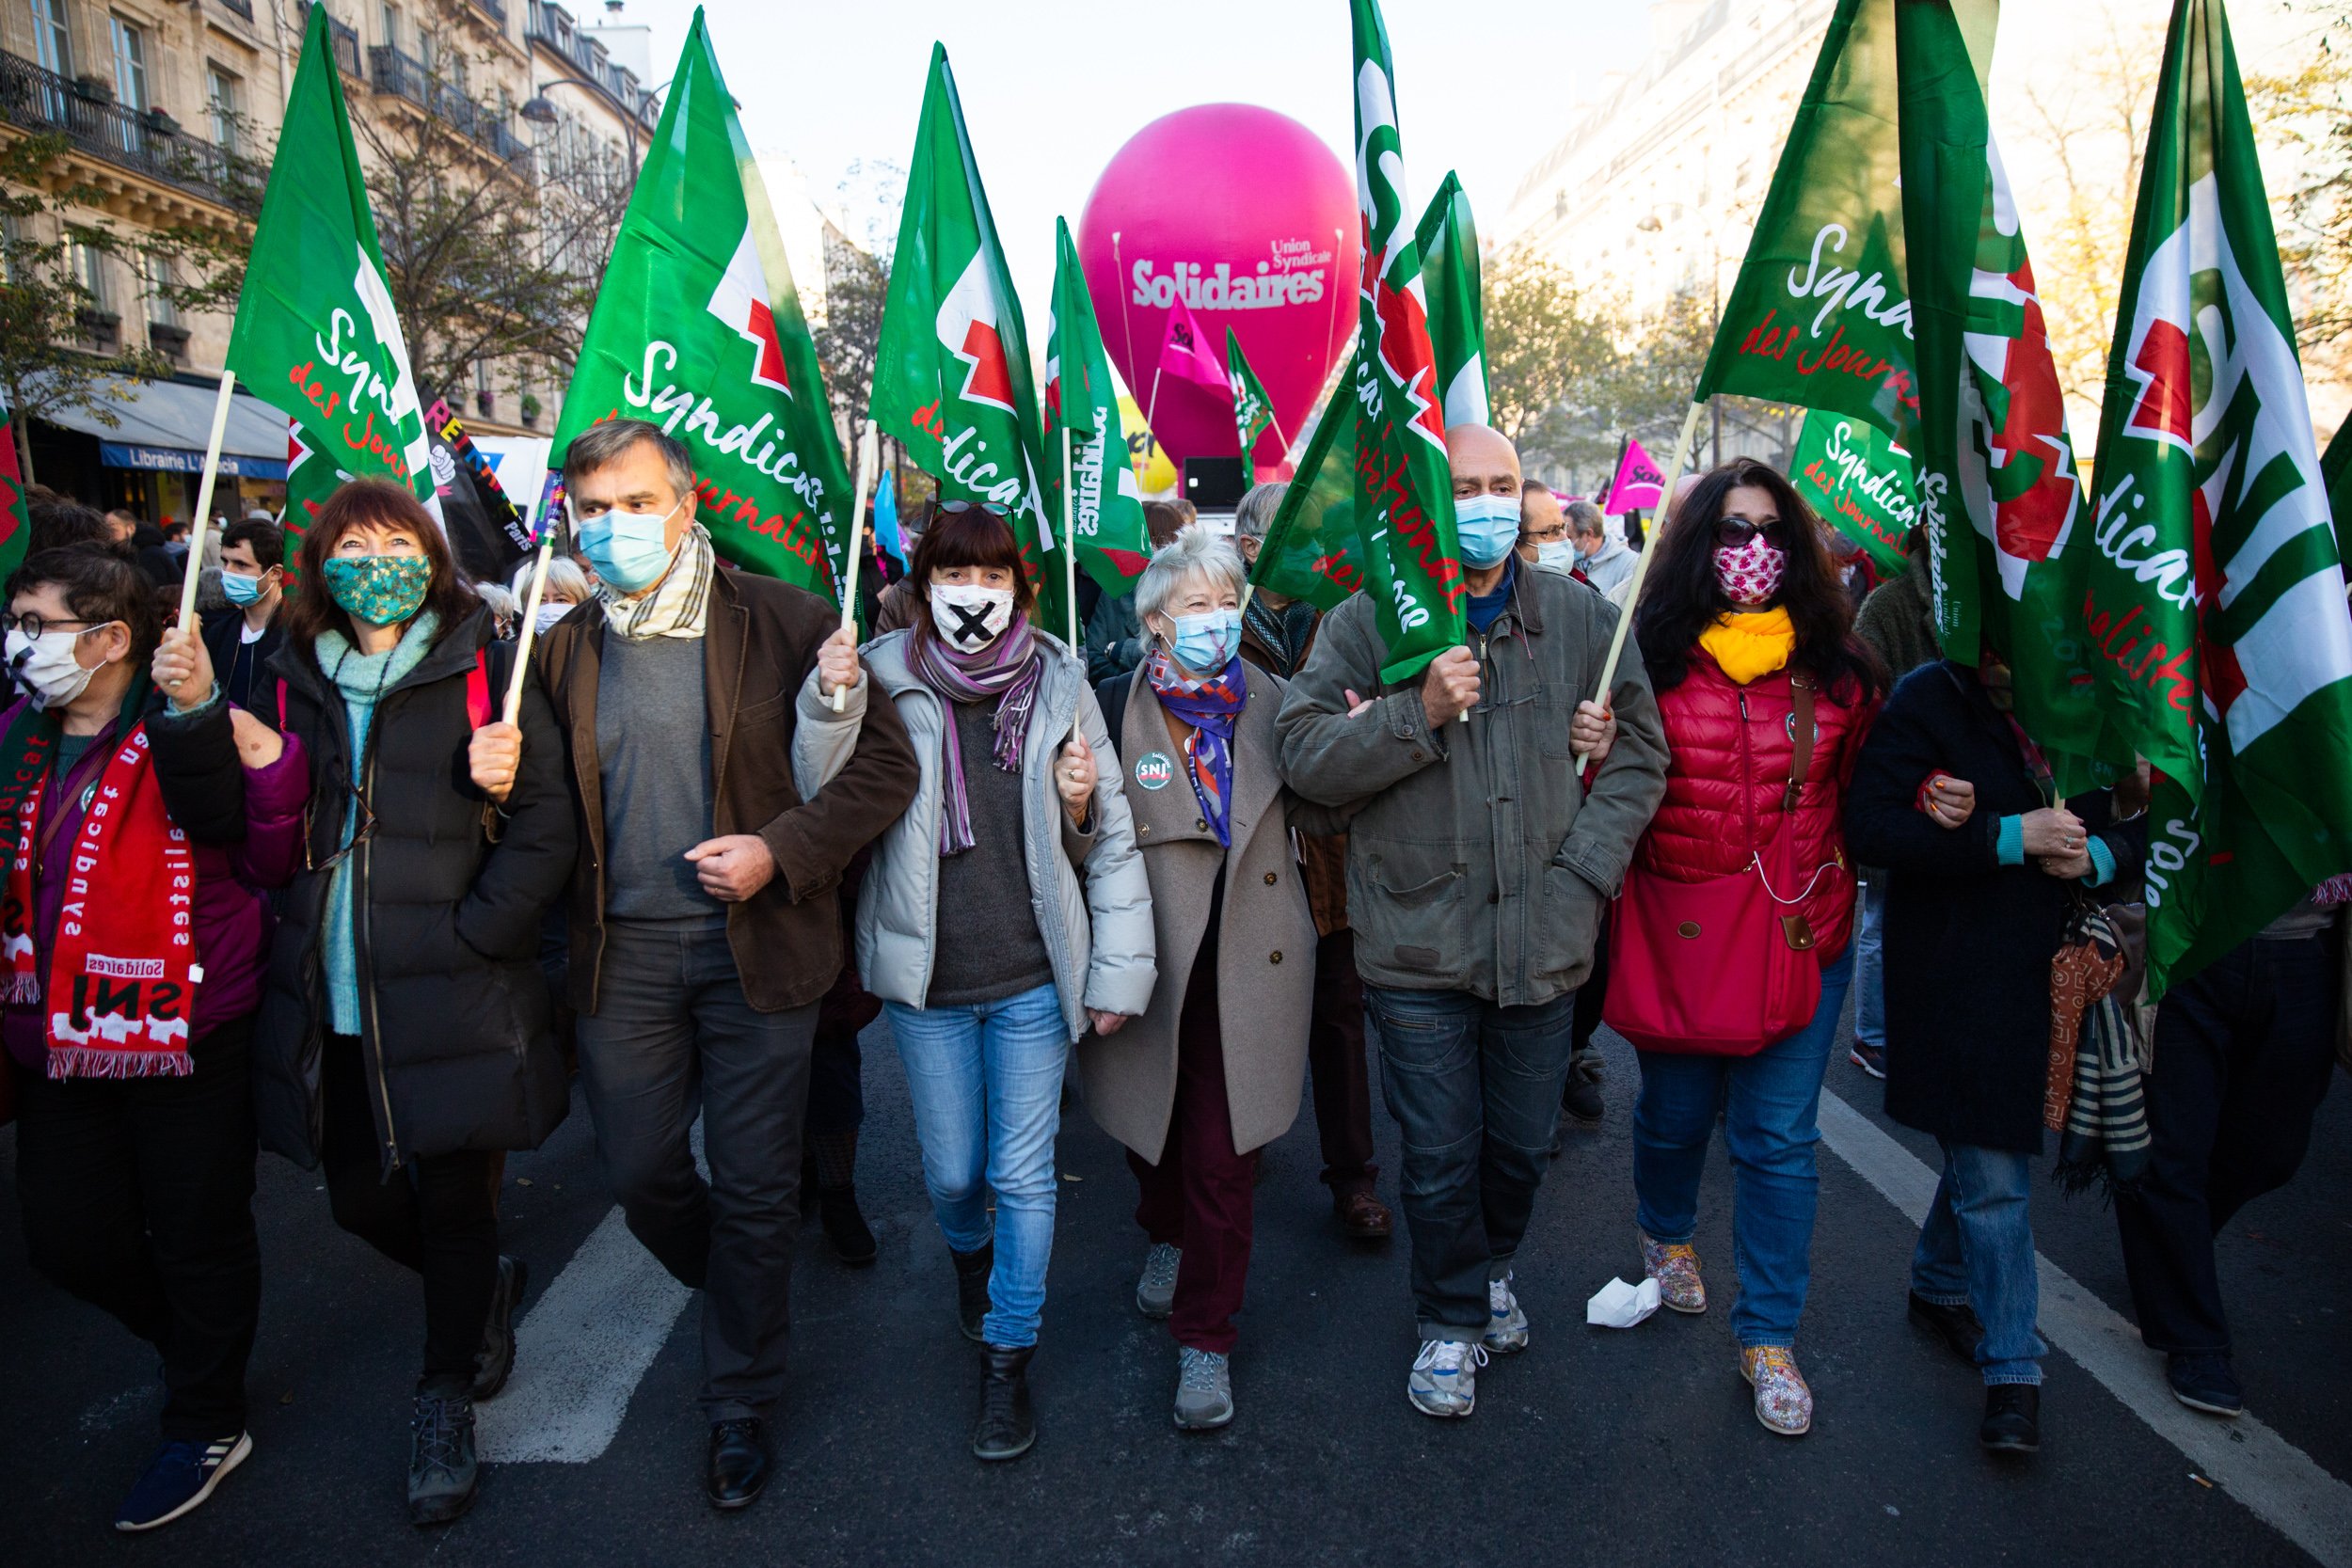  demonstration-march-in-downtown-paris 